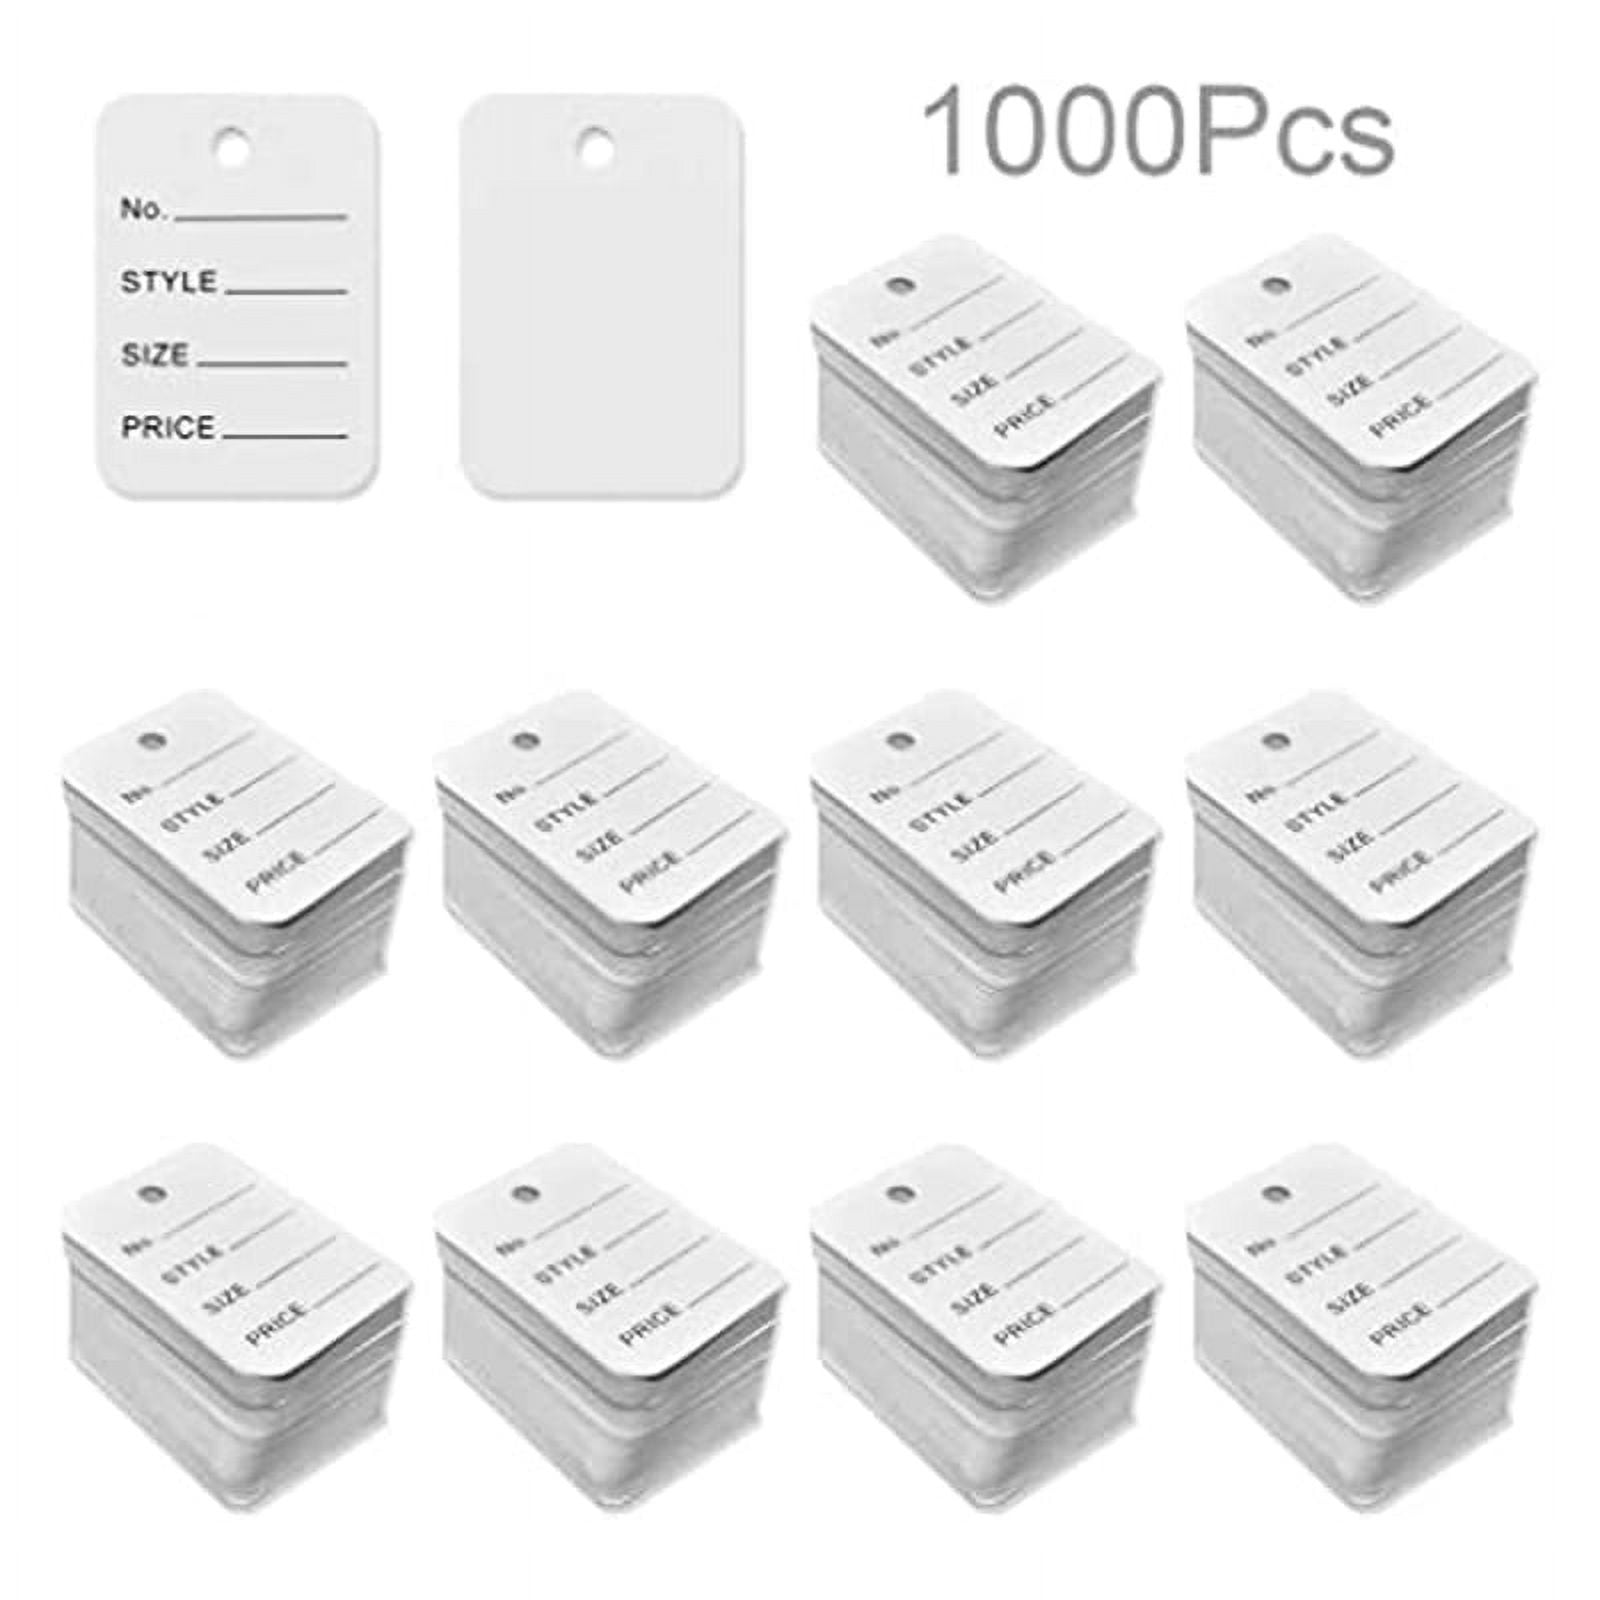 Operitacx 1000 Pcs Label Maker for Clothes Clothing Marking Labels Writable  Label for Jewelry Hanging Jewelry Tag Cardstock Custom Tags Paper Jewelry